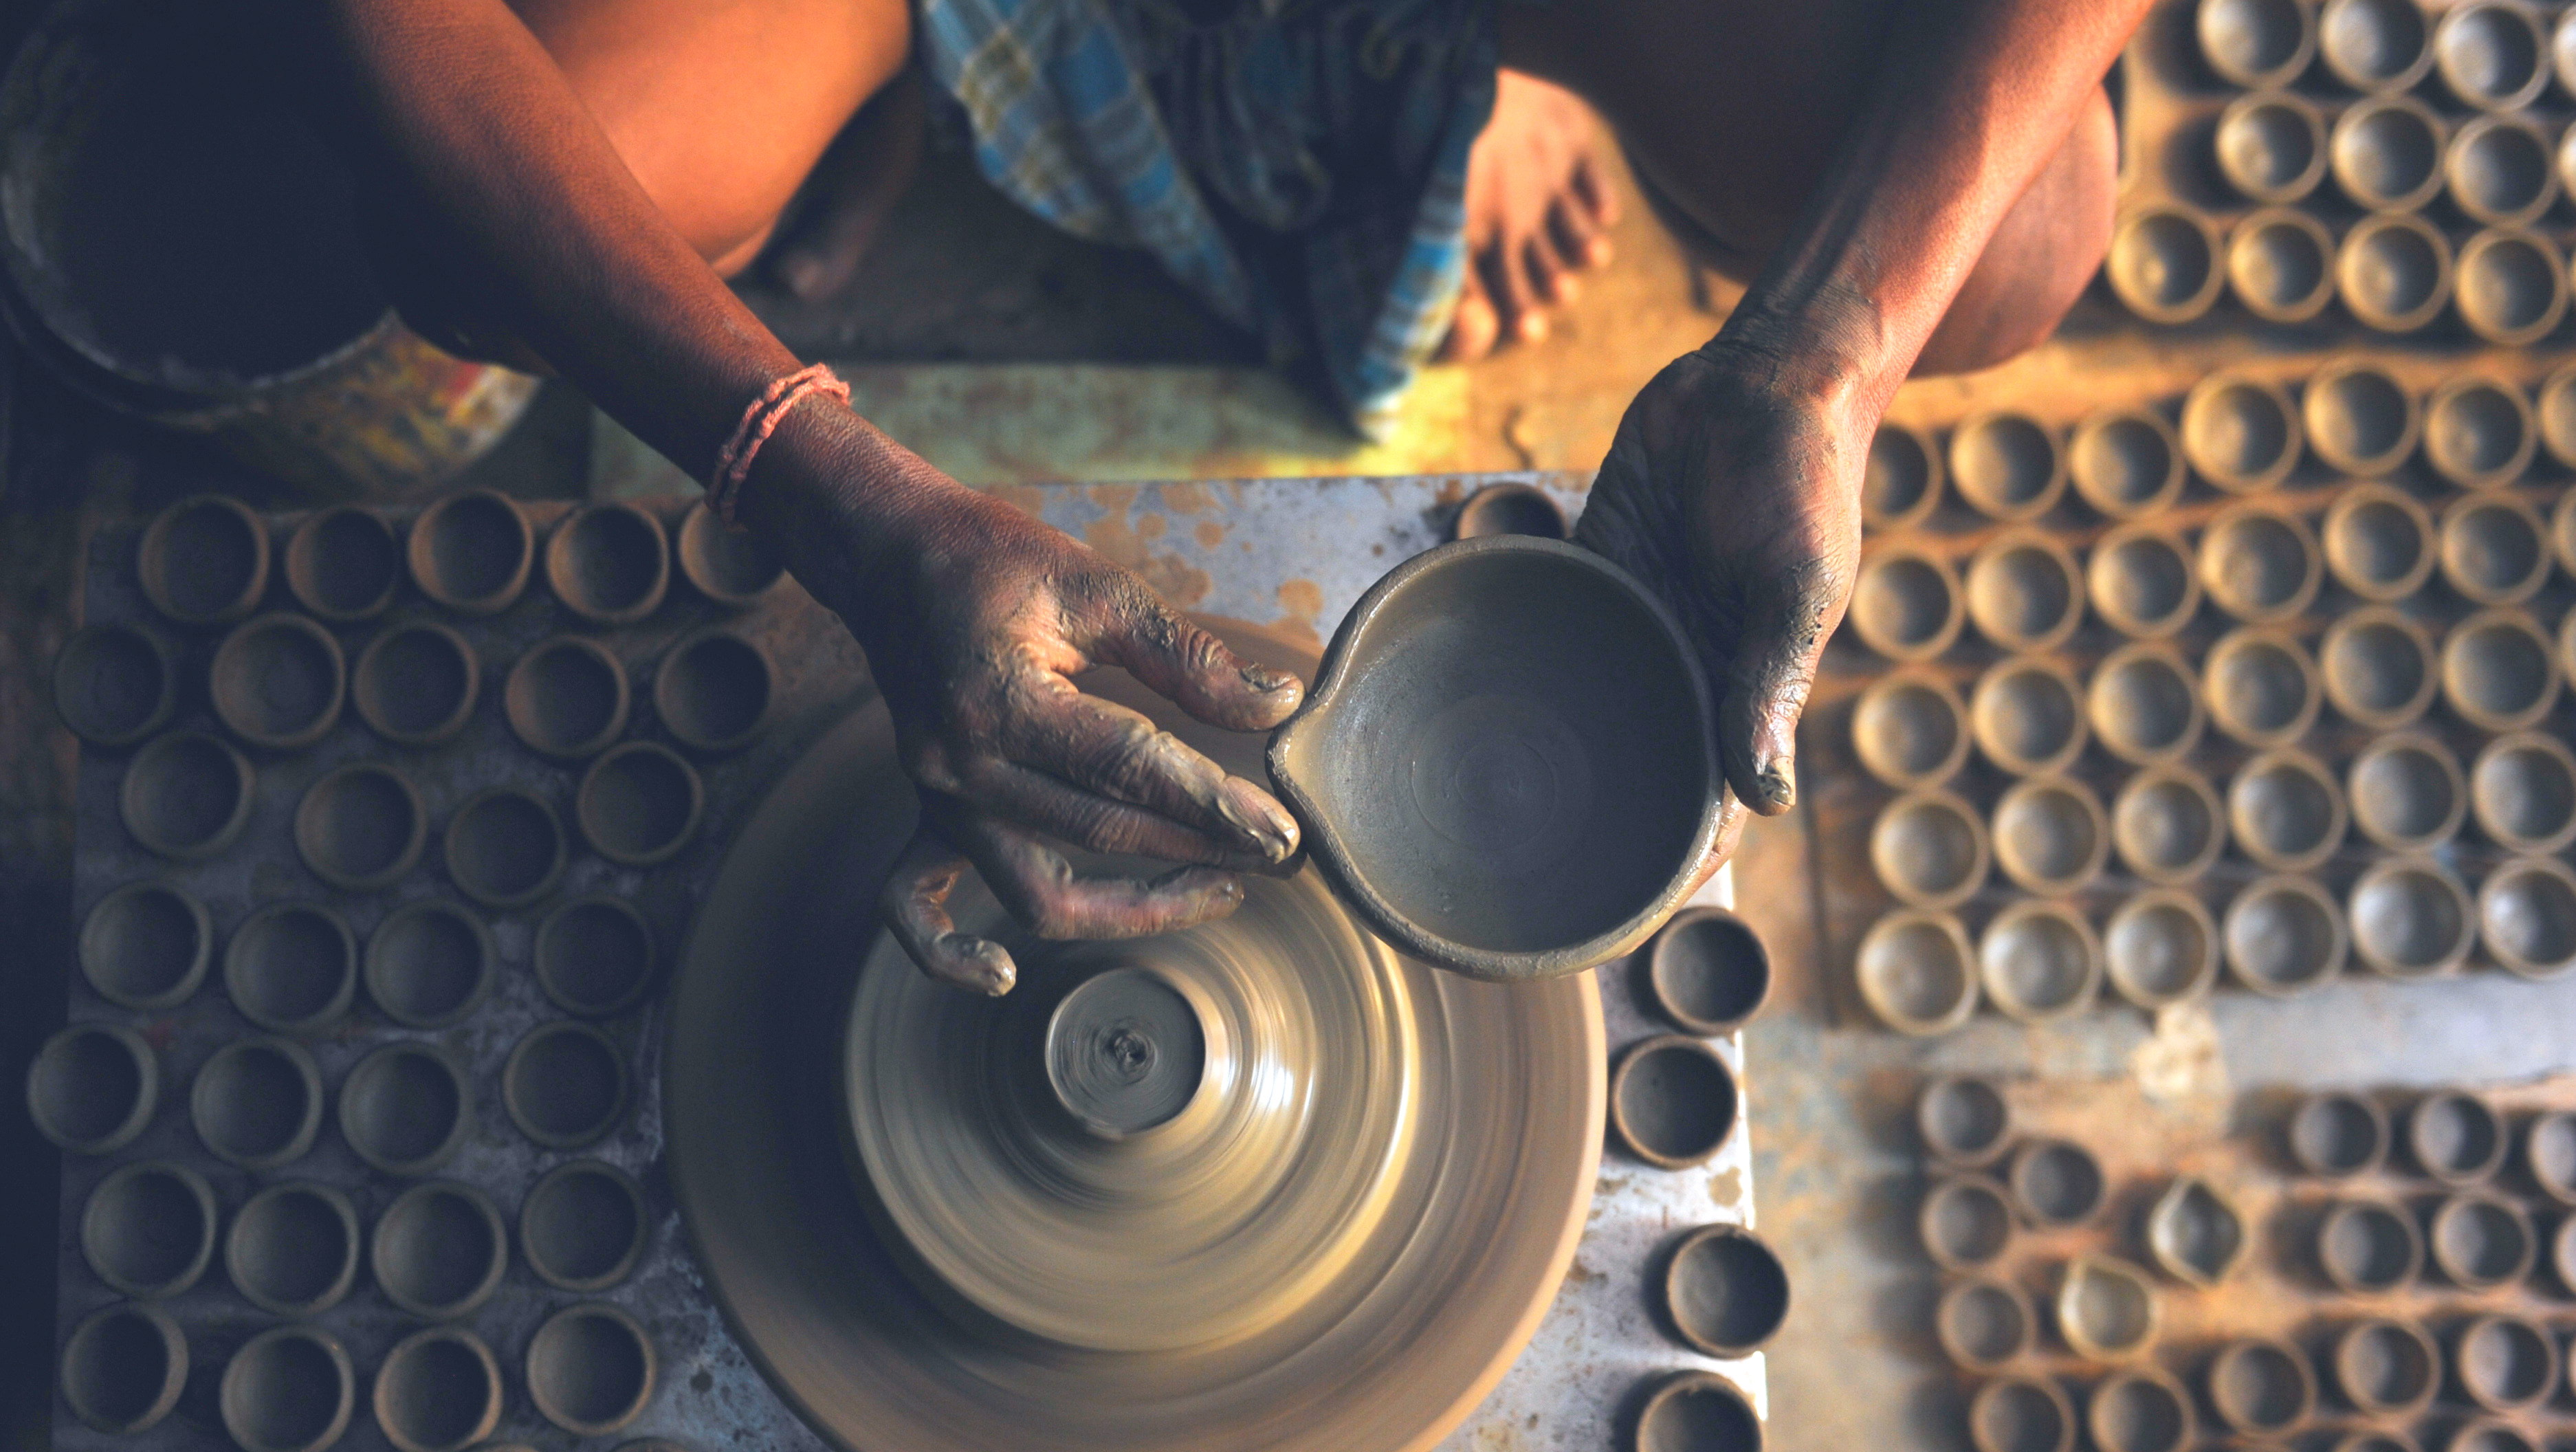 A potter in Chennai makes &#039;diyas&#039; - earthenware oil lamps - ahead of the Diwali festival of lights